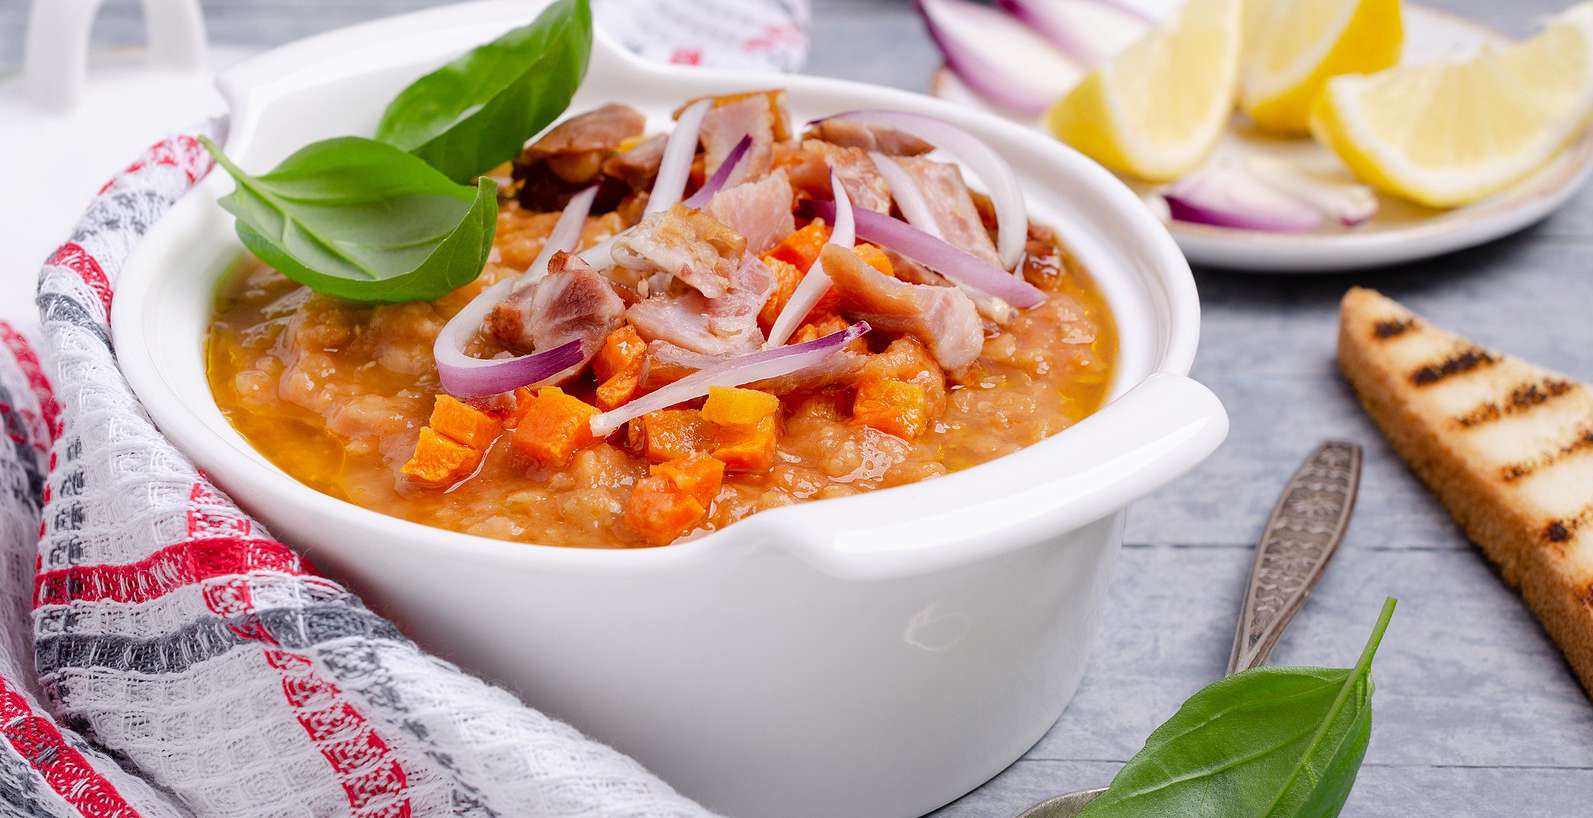 Cozy Butternut, Sweet Potato, and Red Lentil Stew